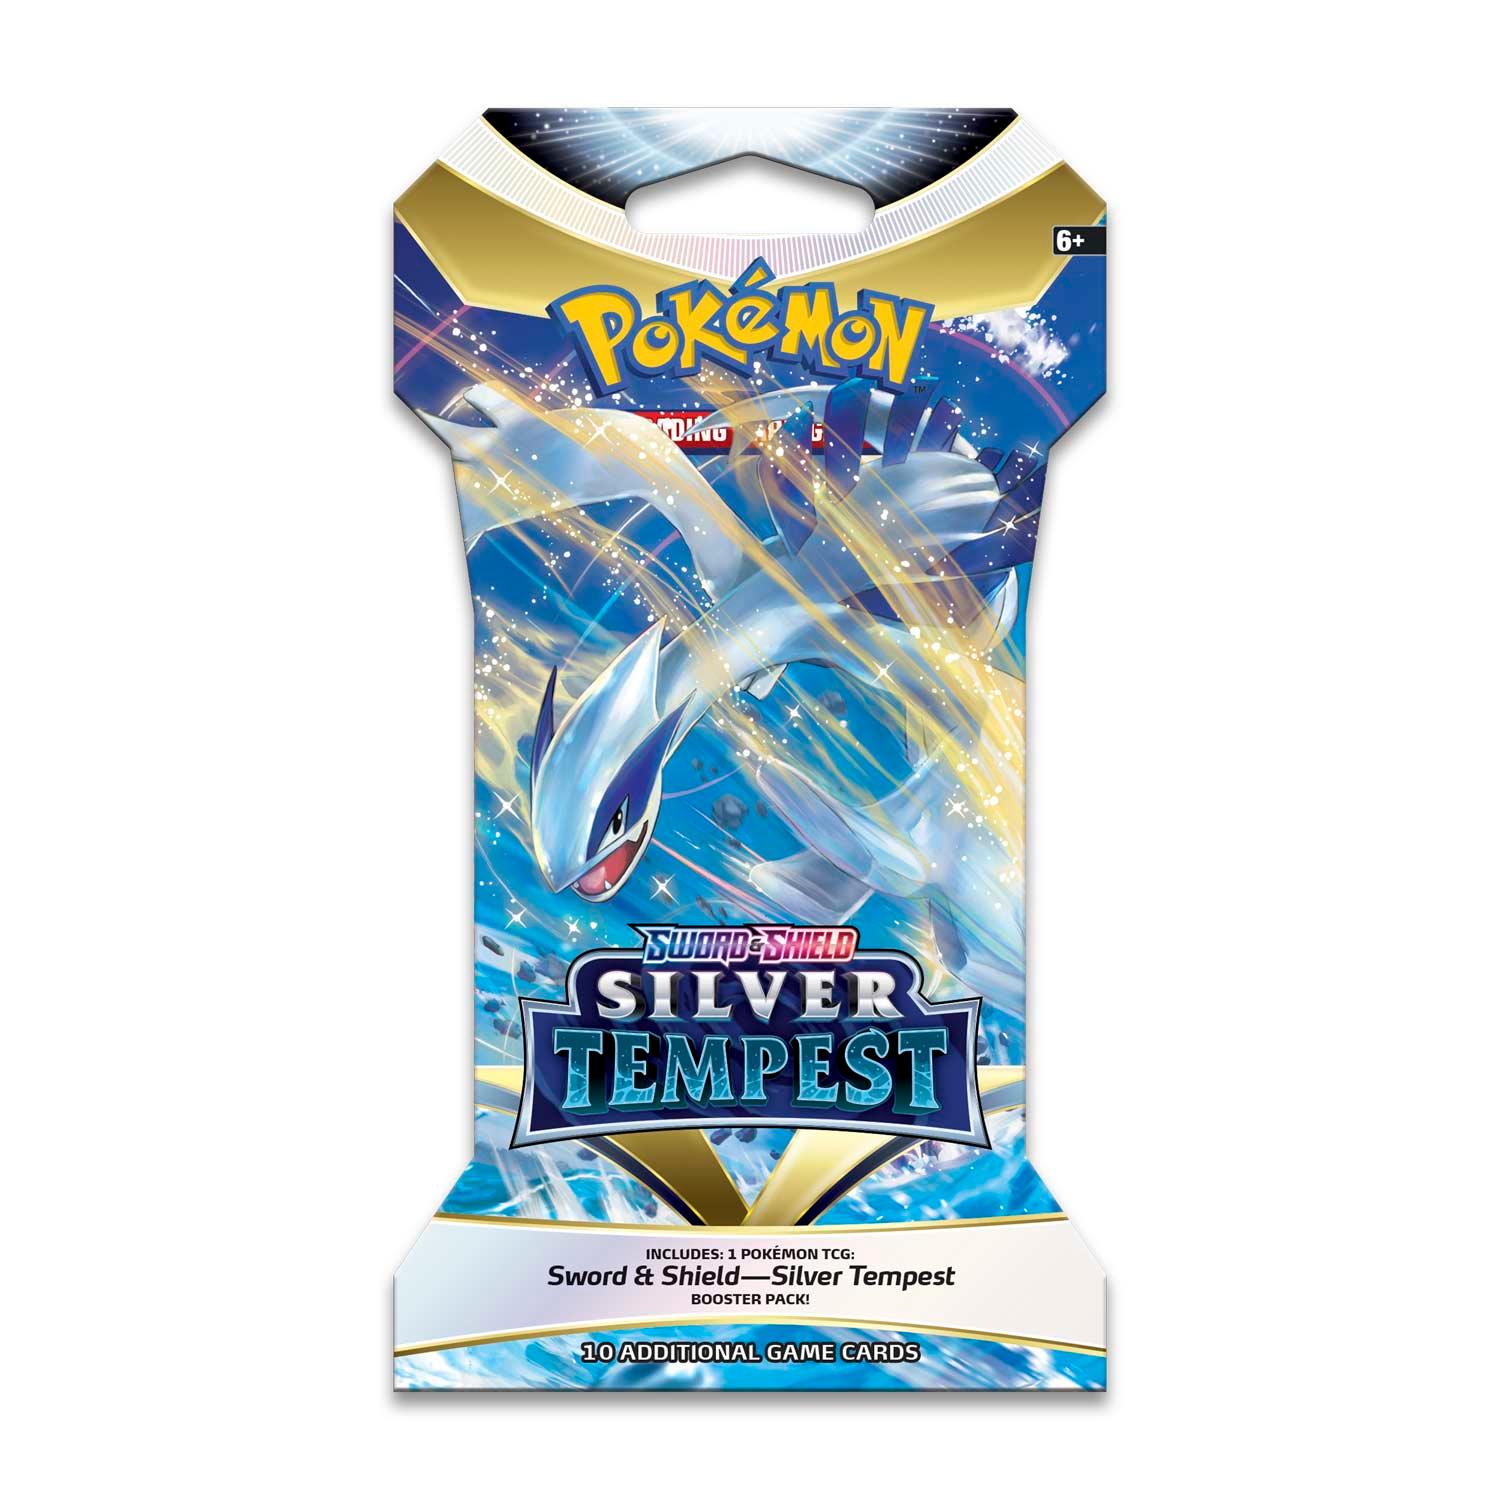 Pokemon Trading Cards Set of 10 Cards - Sword & Shield Silver Tempest - BumbleToys - 14 Years & Up, 8-13 Years, Boys, Card & Board Games, Pokémon, Pre-Order, Puzzle & Board & Card Games